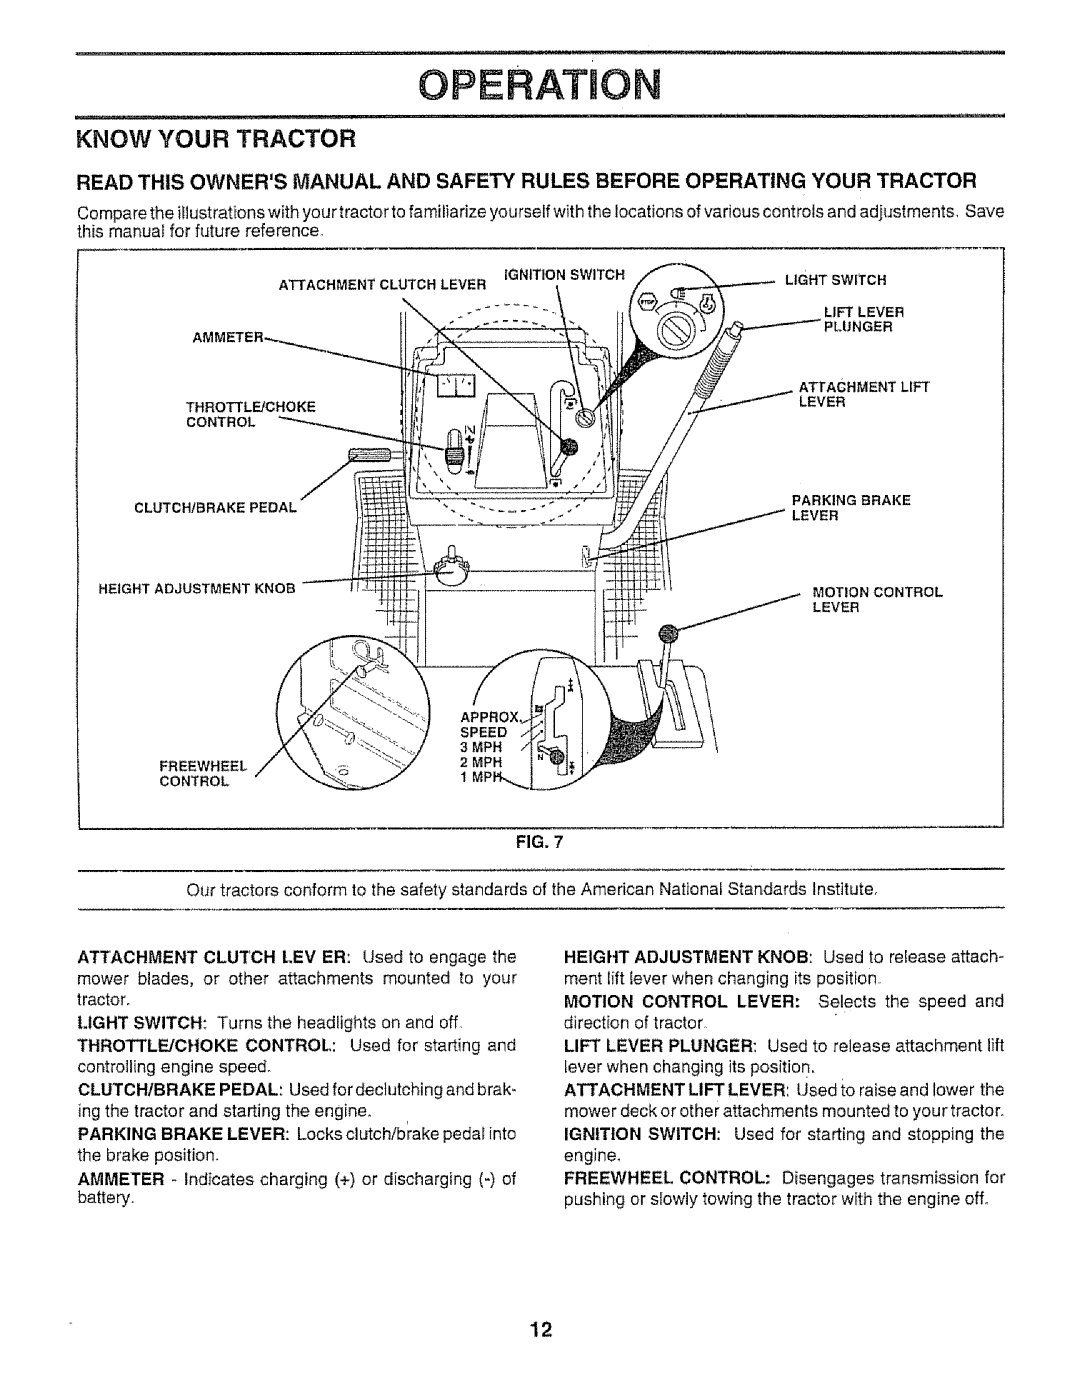 Craftsman 917.259592 owner manual ERATmON, Know Your Tractor 